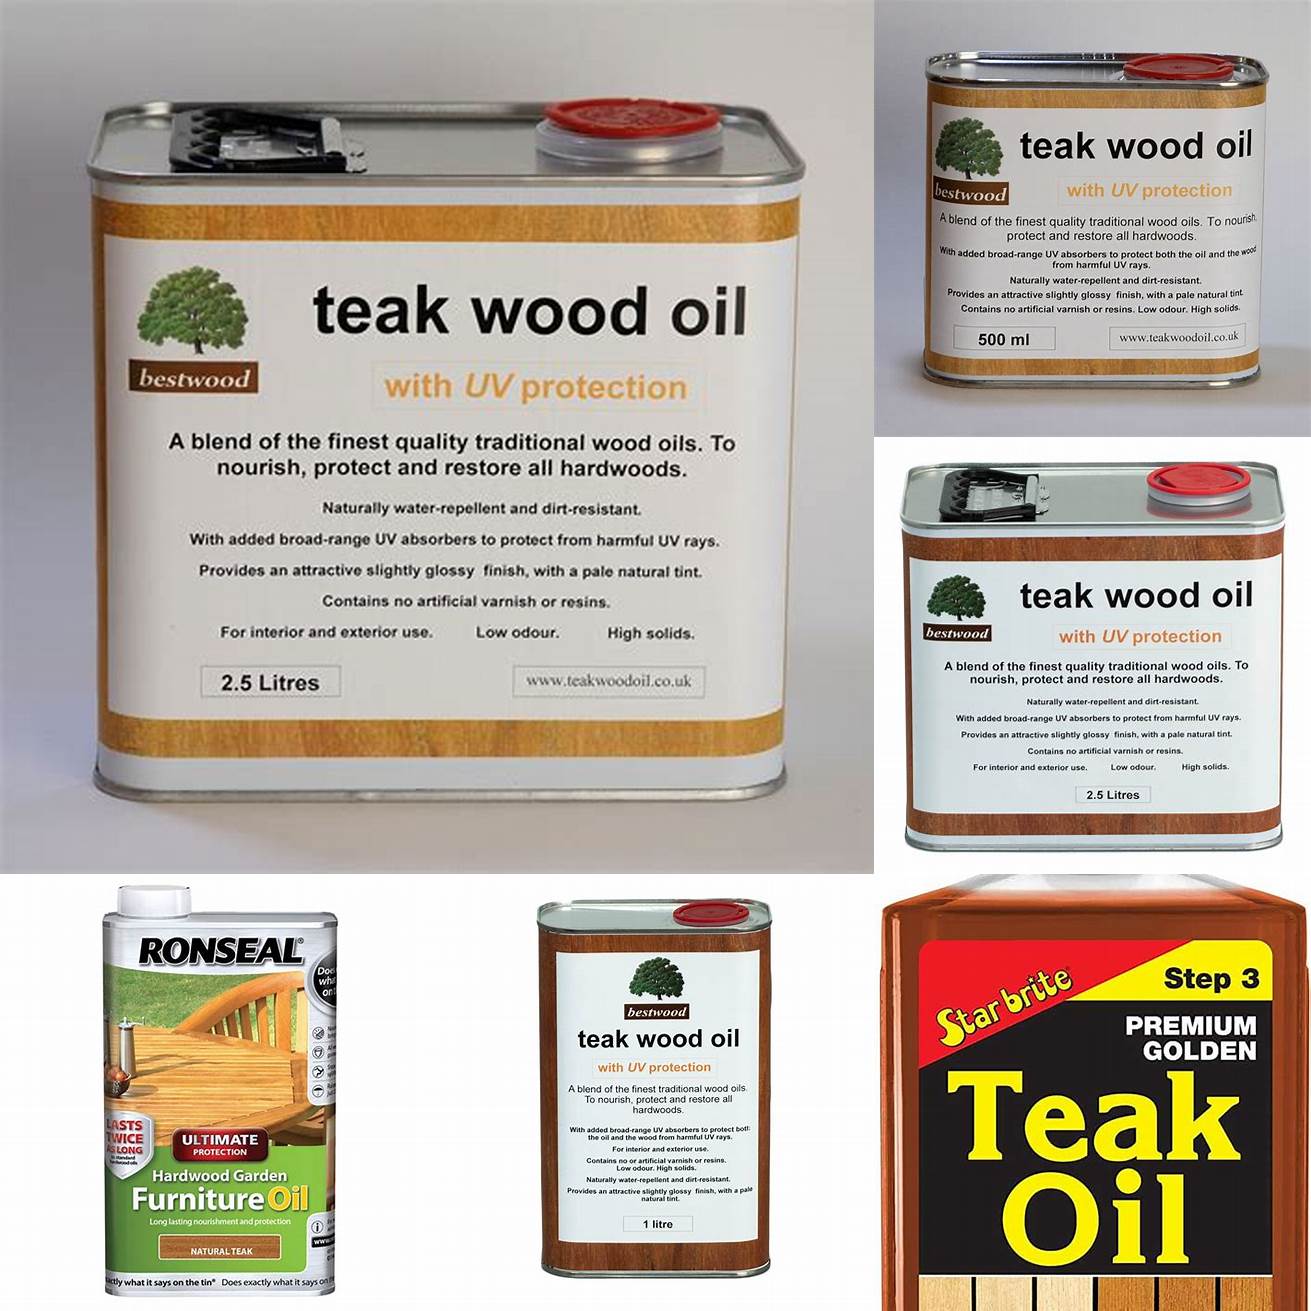 Teak Oil and UV Protection